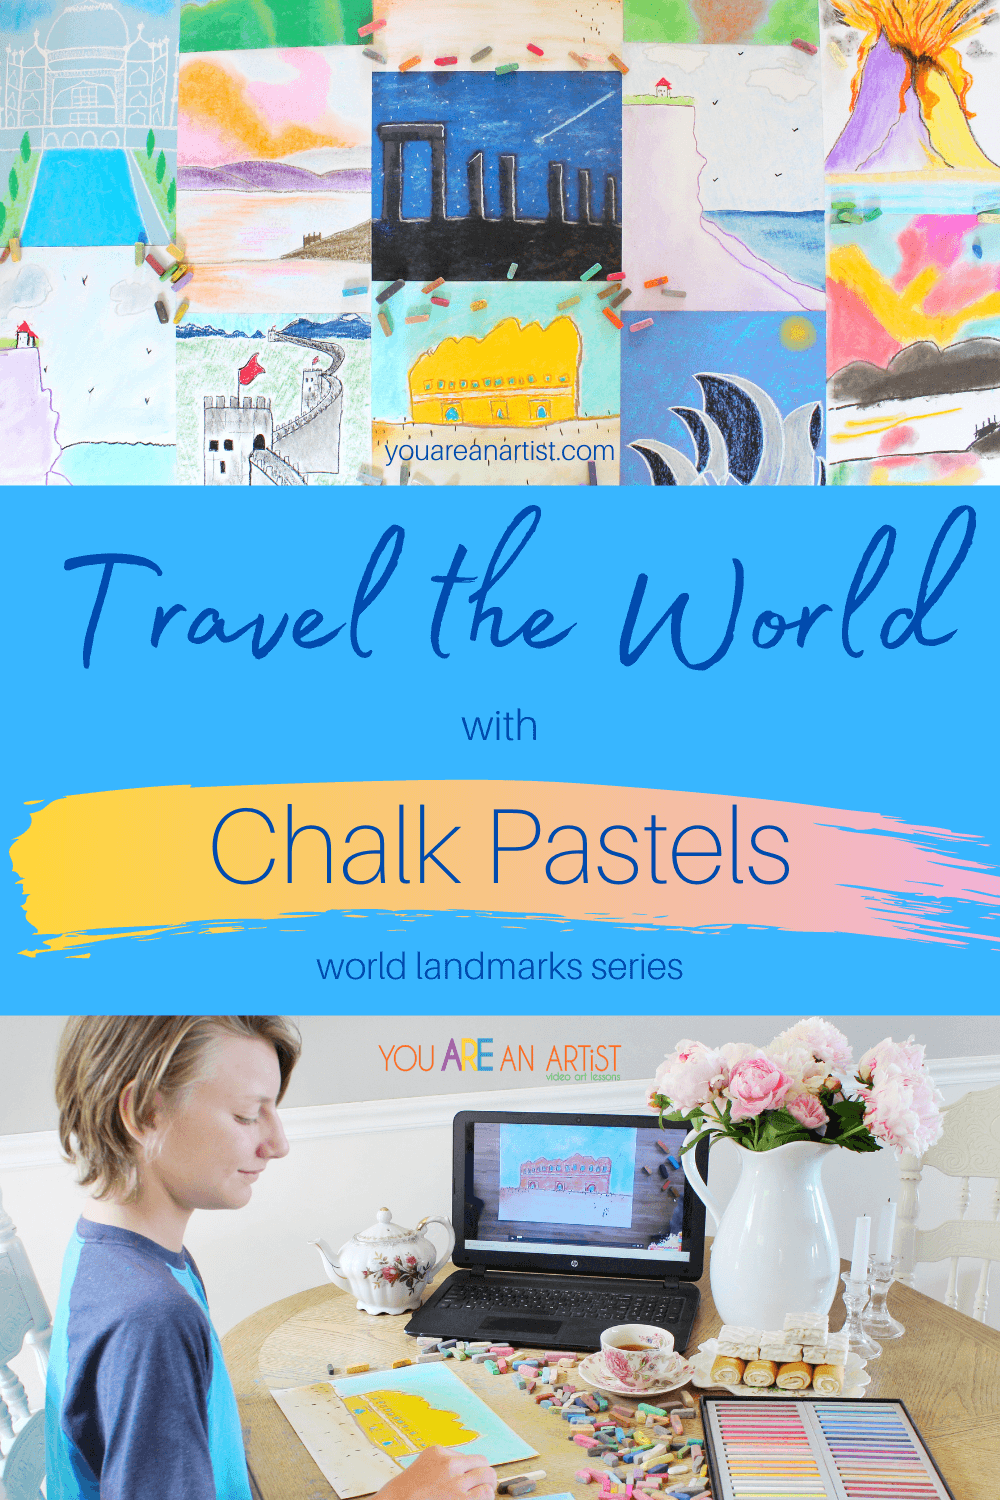 Travel the World with Chalk Pastels: Did you know that you can travel the world with chalk pastels? That's right! Let Nana take you on a trip around the world with her World Landmarks series! This is the prefect addition to your homeschool geography lessons, world history lessons, or just because! #YouAREAnArtist #chalkpastels #homeschool #homeschooling #homeschoolgeography #handsongeography #worldlandmarks #traveltheworldwithchalkpastels